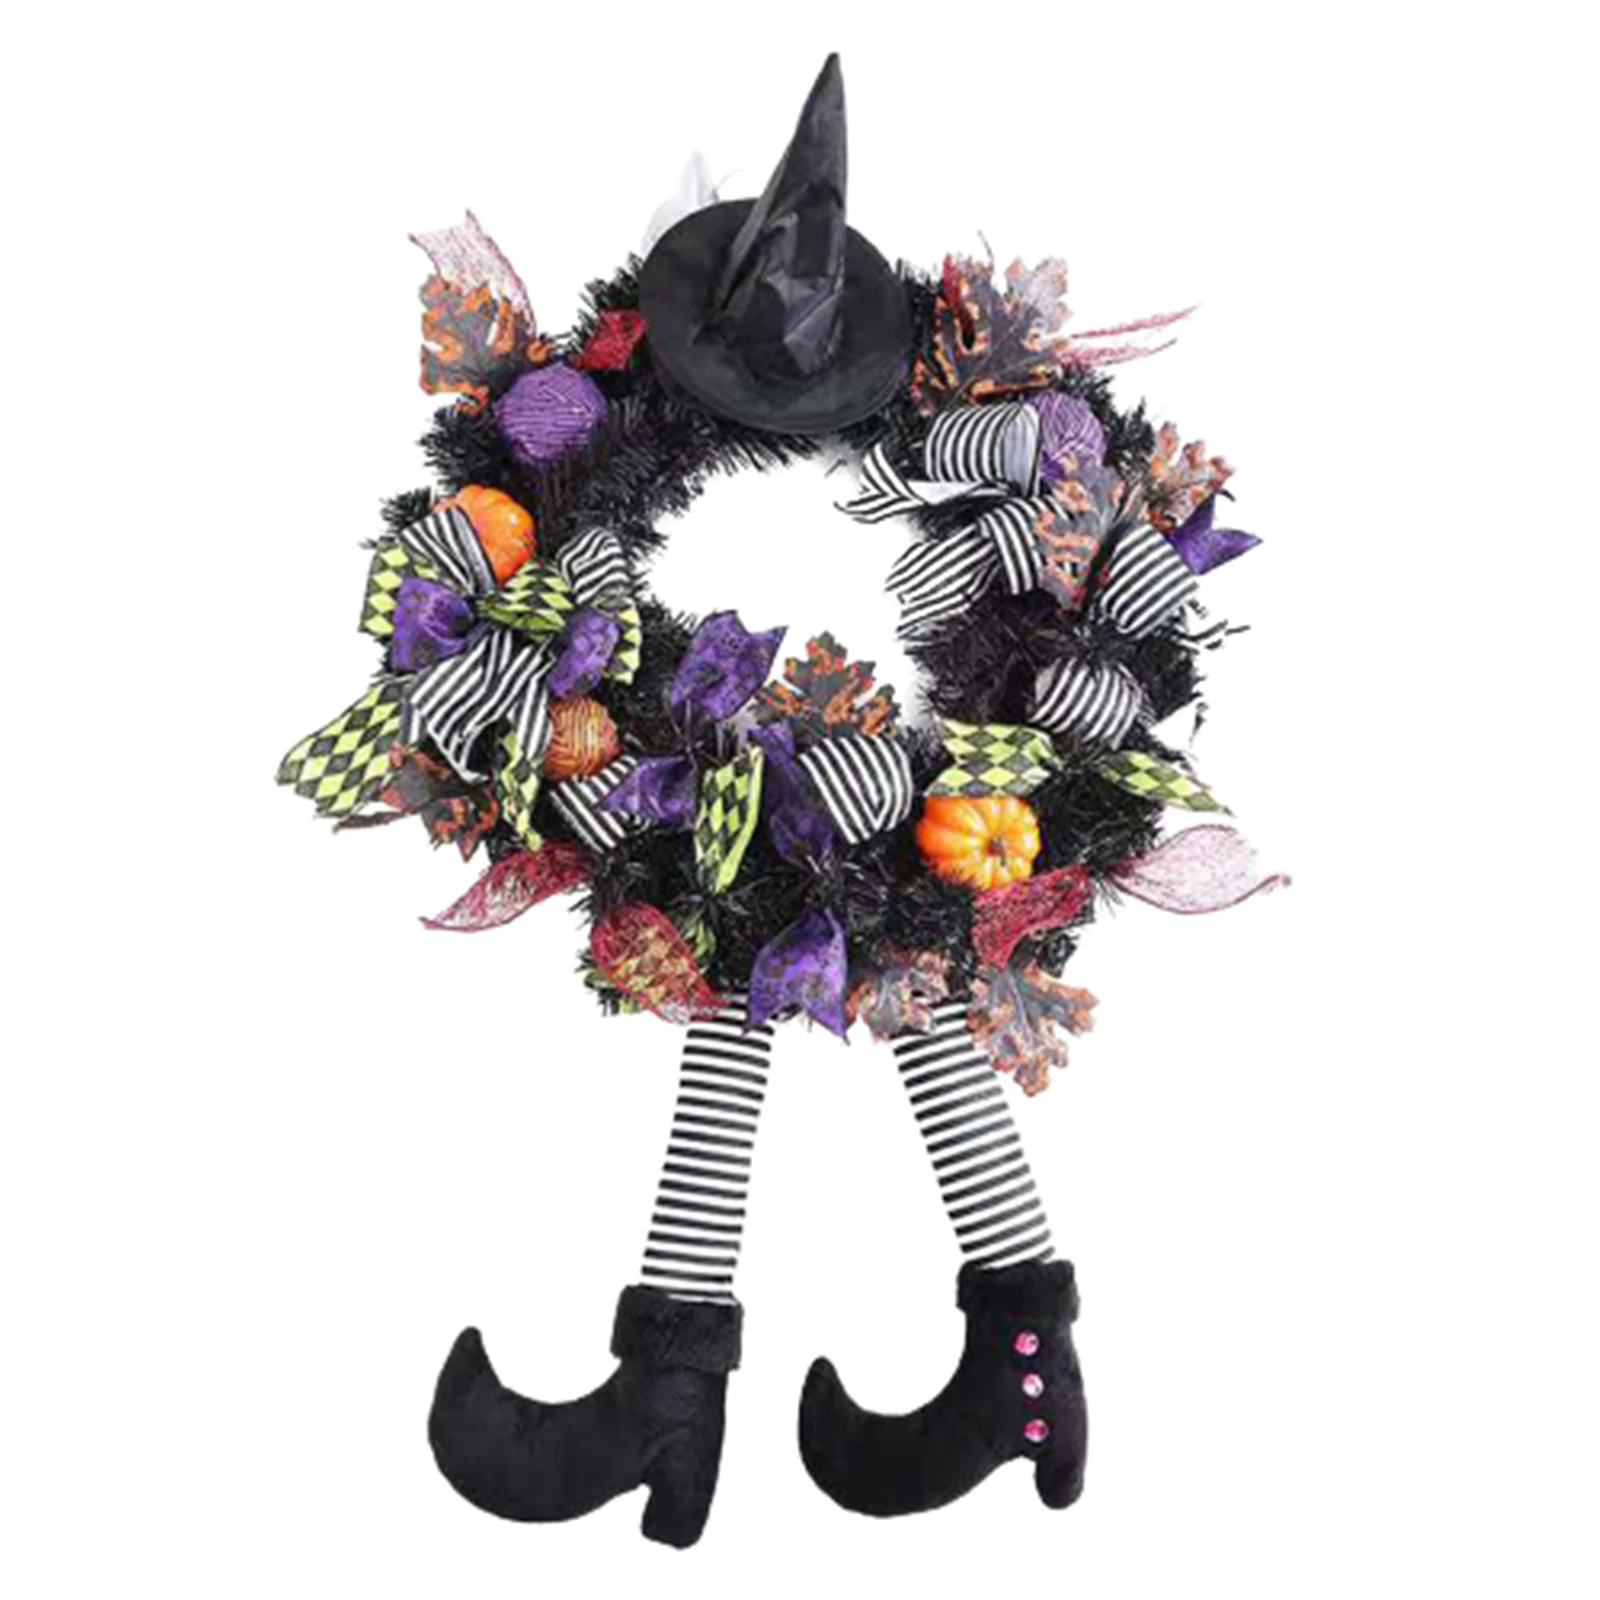 

Halloween Hanging Window Witches Wreath Easy to Hang Witches Garlands with Hat & Long Legs Decor for Halloween Festival Party